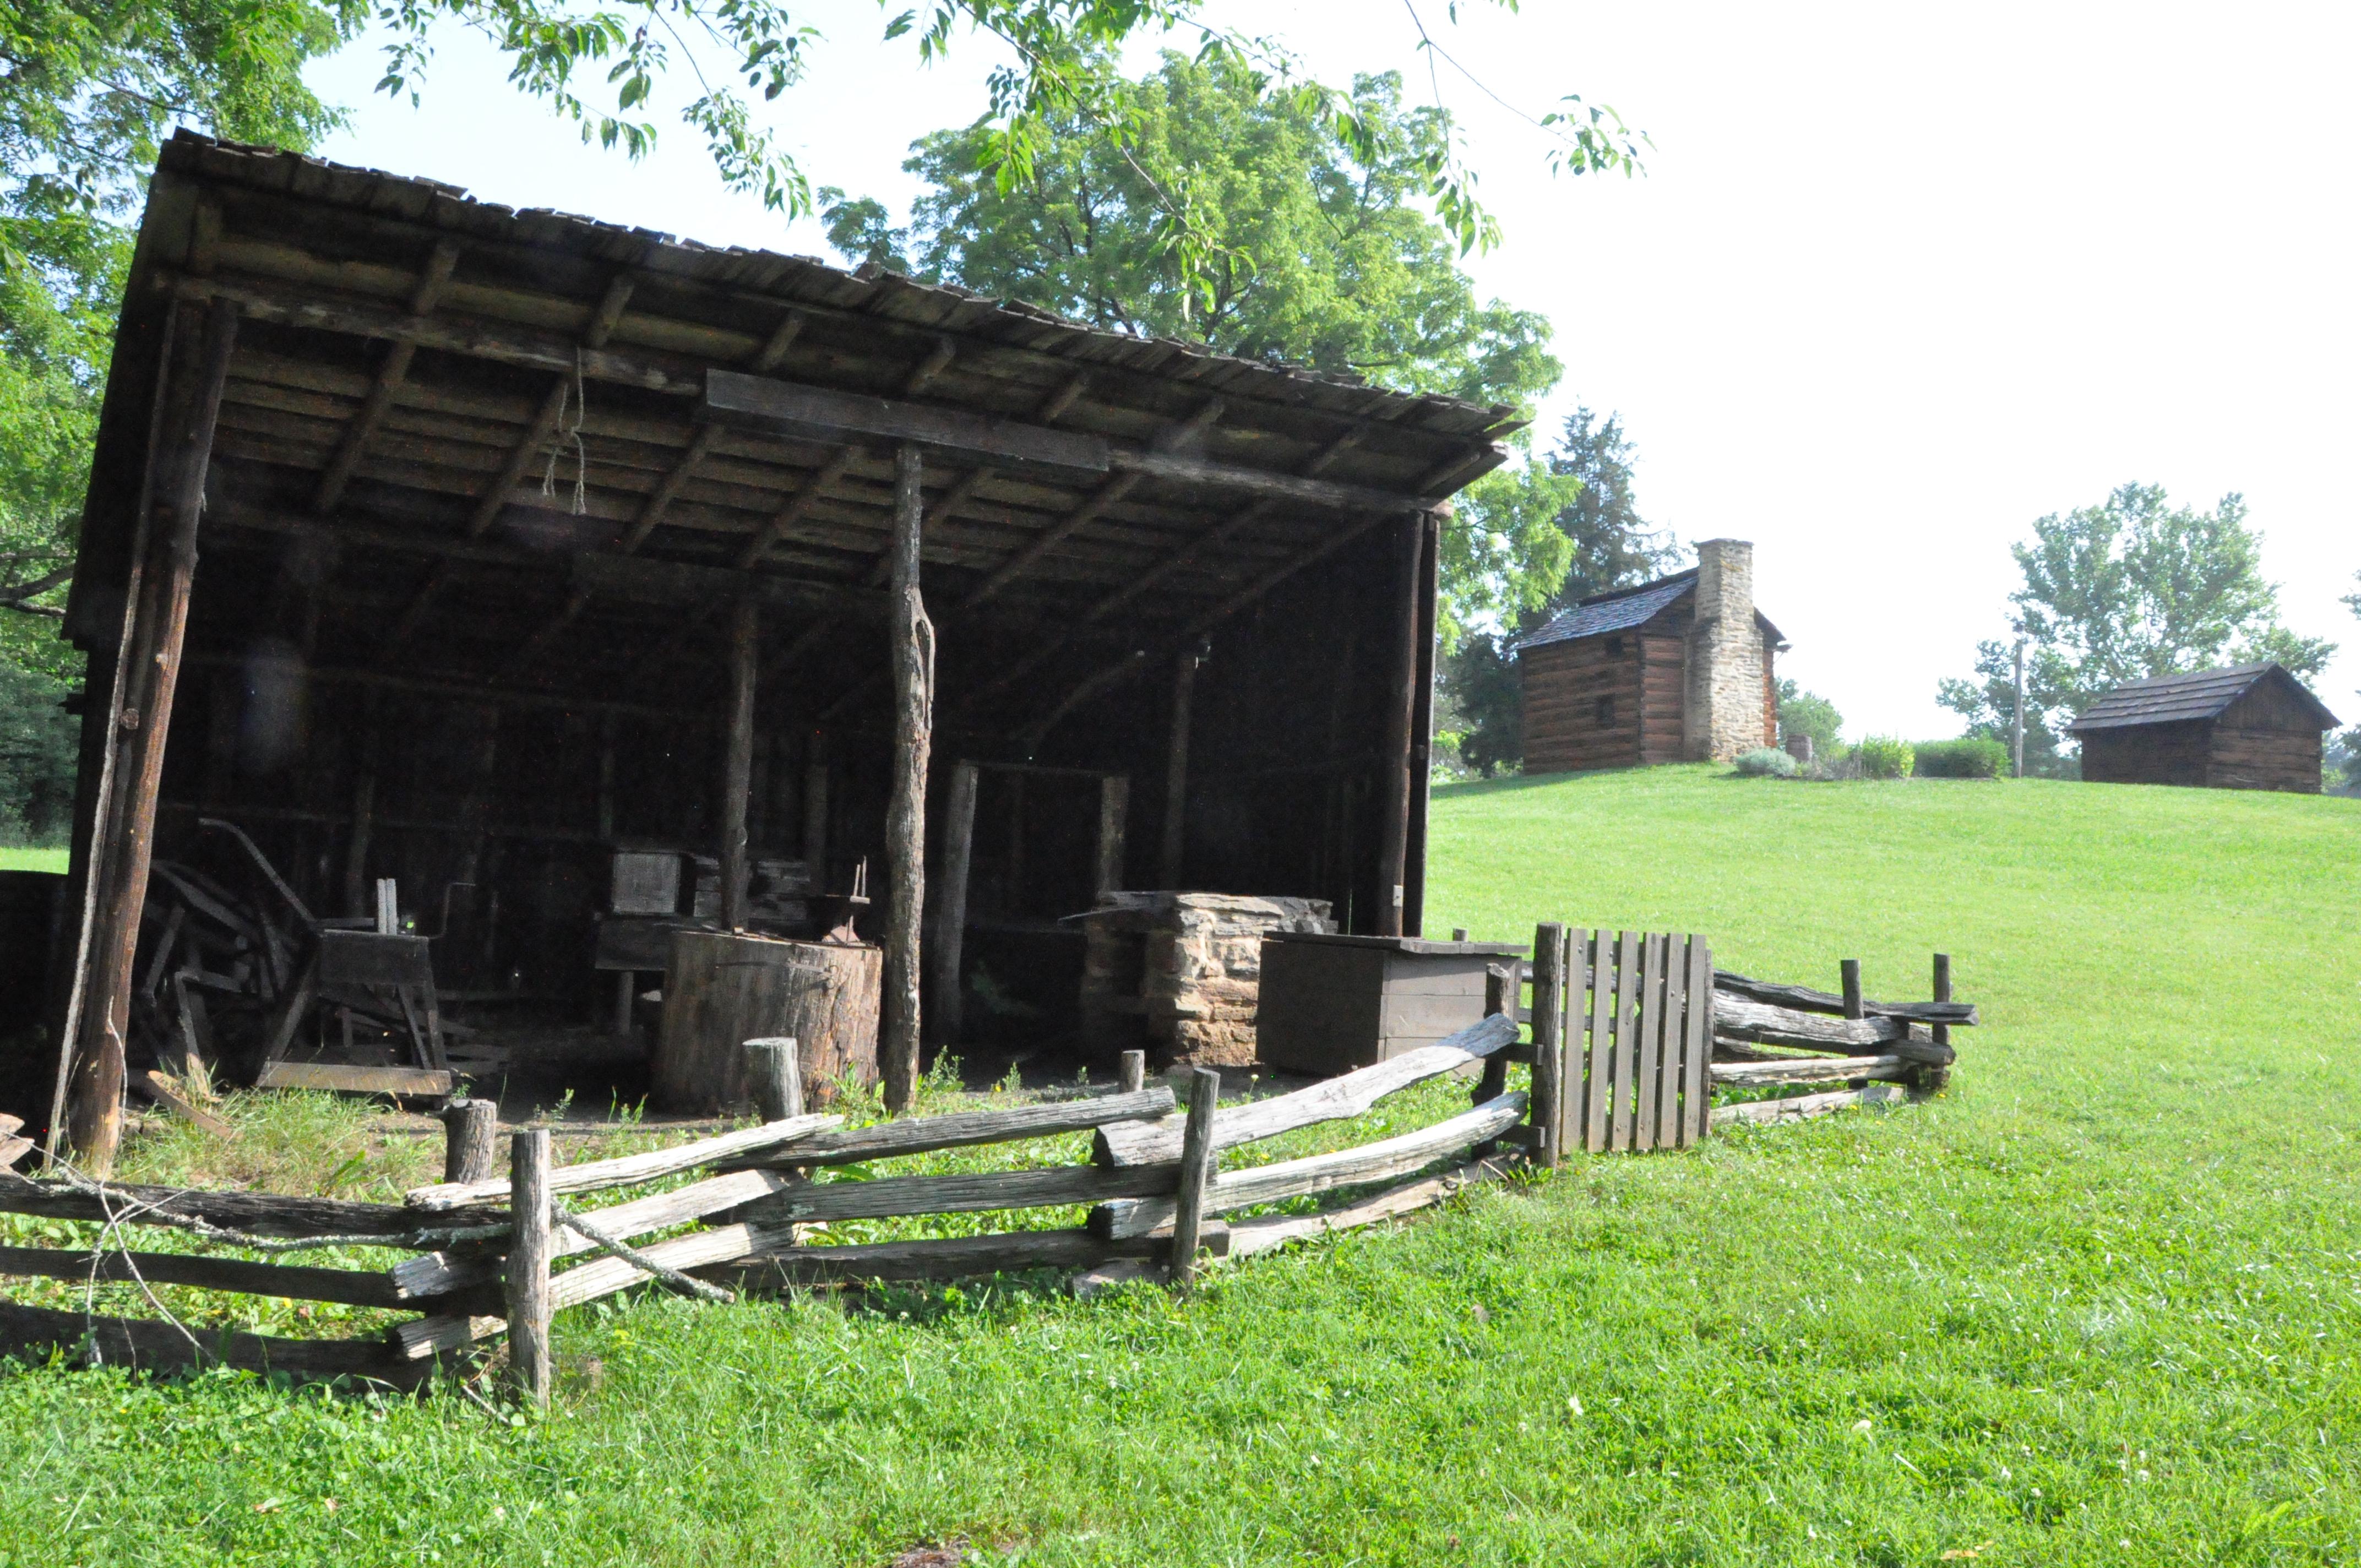 Blacksmith shed with kitchen cabin and smokehouse uphill in back ground